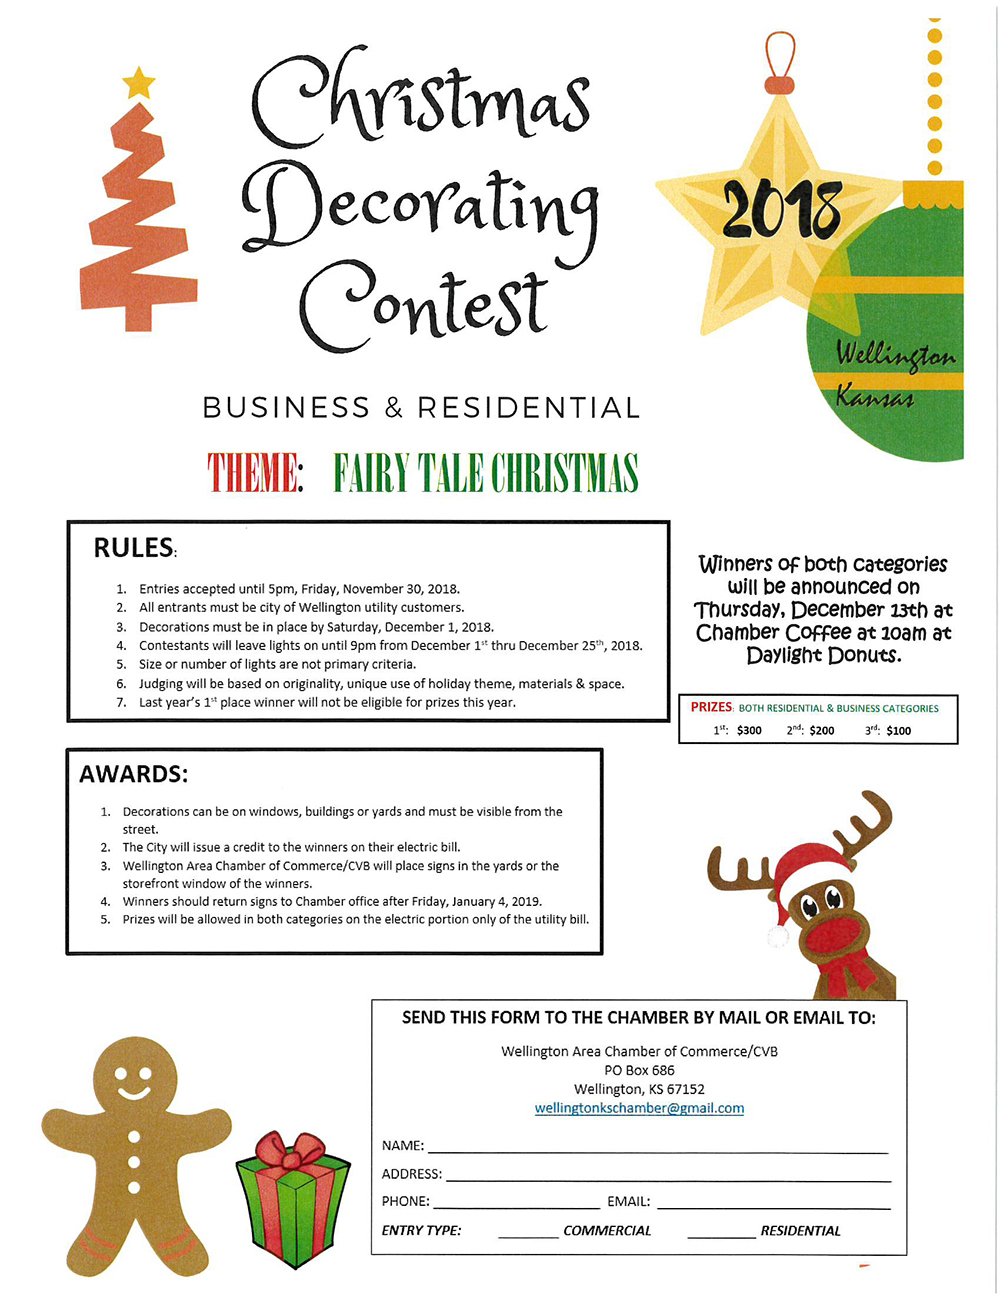 christmas decorating contest flyer, christmas tree decorating contest flyer, christmas house decorating contest flyer, christmas door decorating contest flyer template, holiday decorating contest flyer, christmas decoration flyer, christmas tree flyer templates